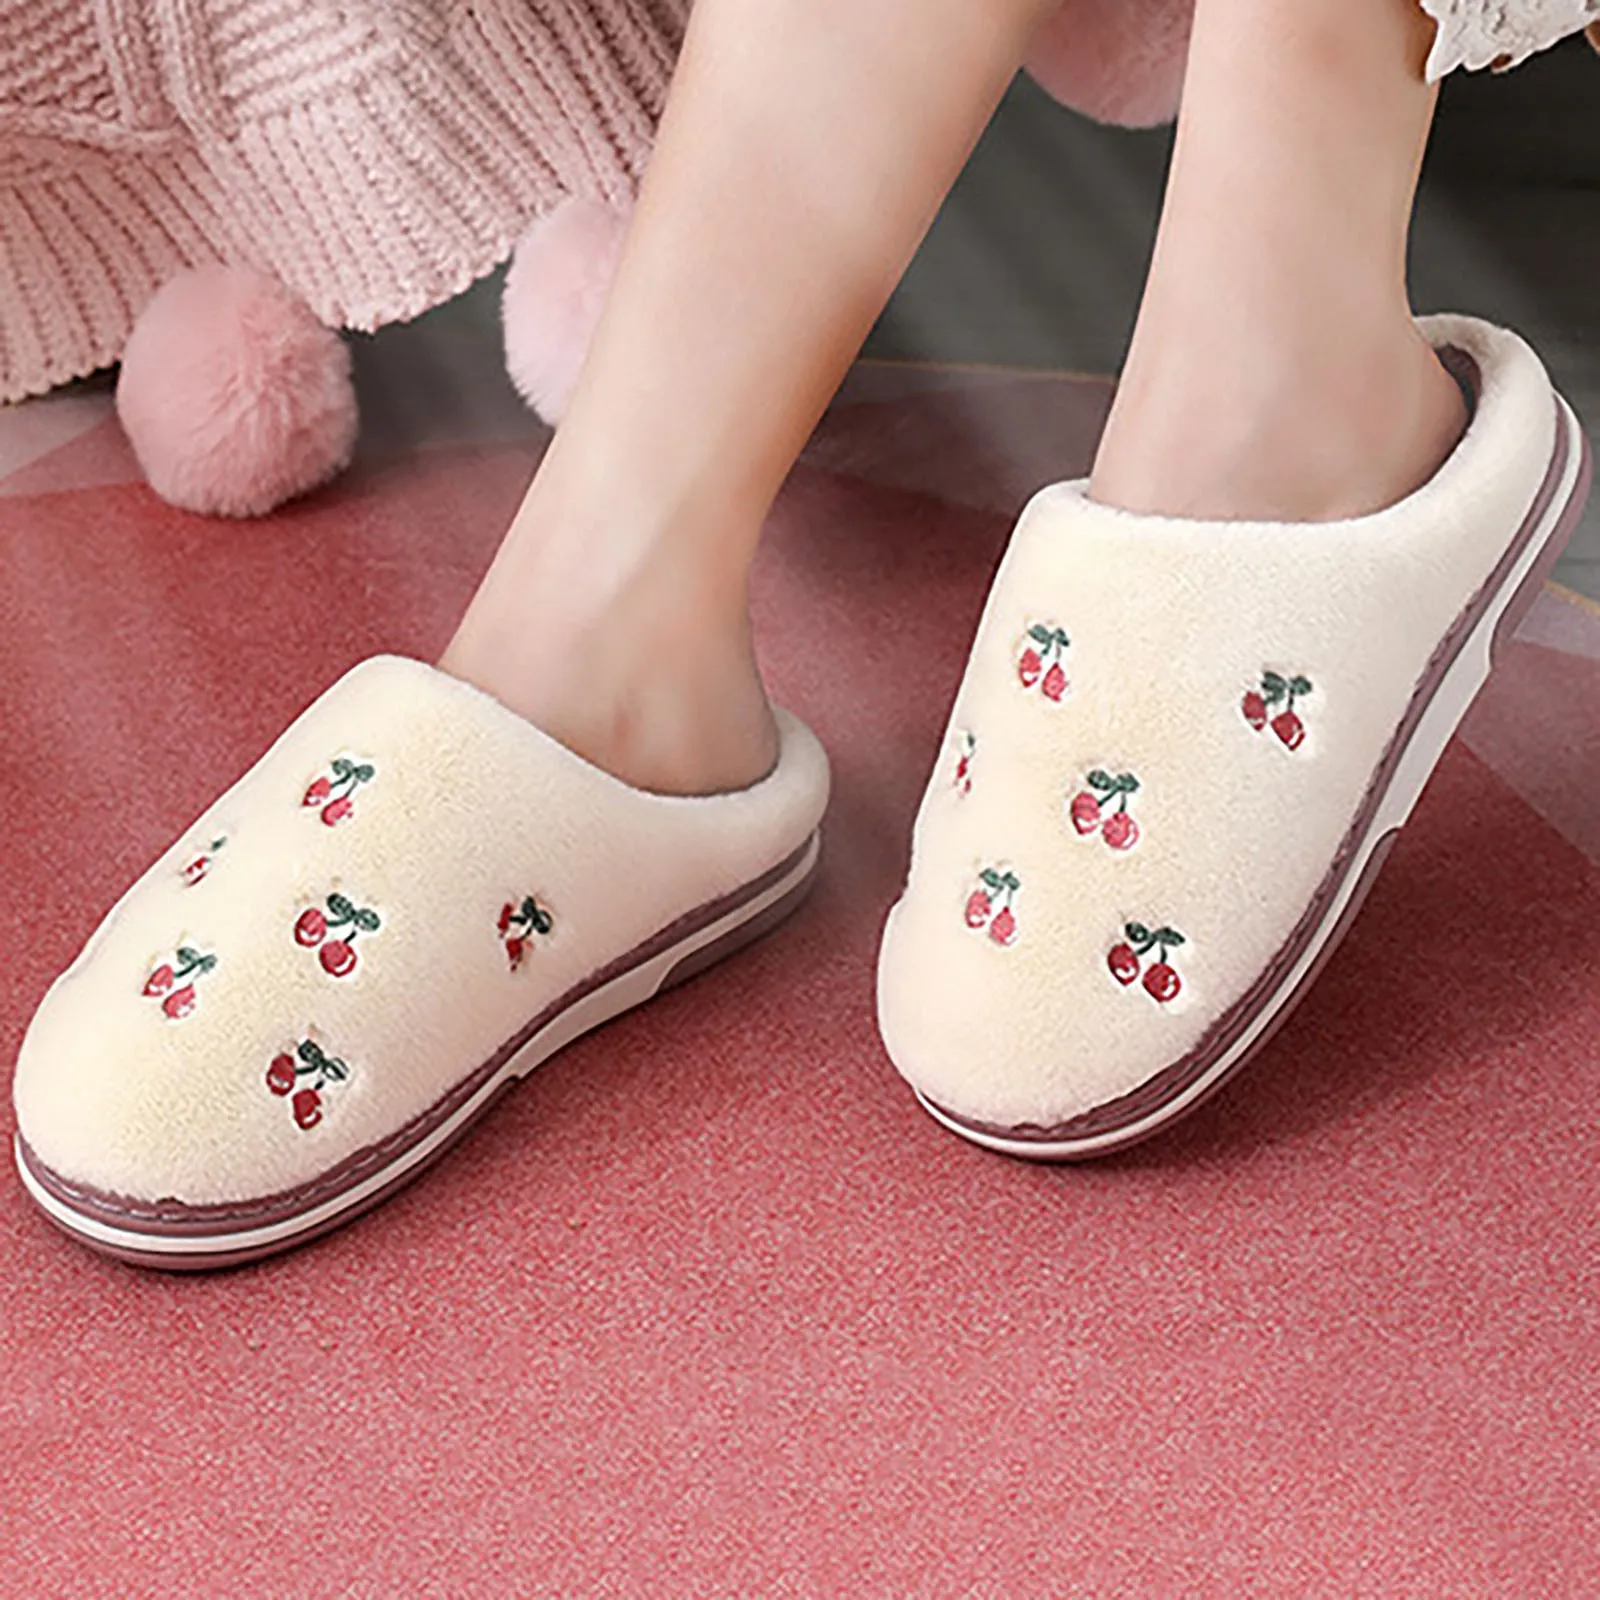 

Women Winter Home Slippers Cartoon Nonslip Soft Winter Warm House Spa Slippers Indoor Bedroom Cute Soft Plush House Slippers